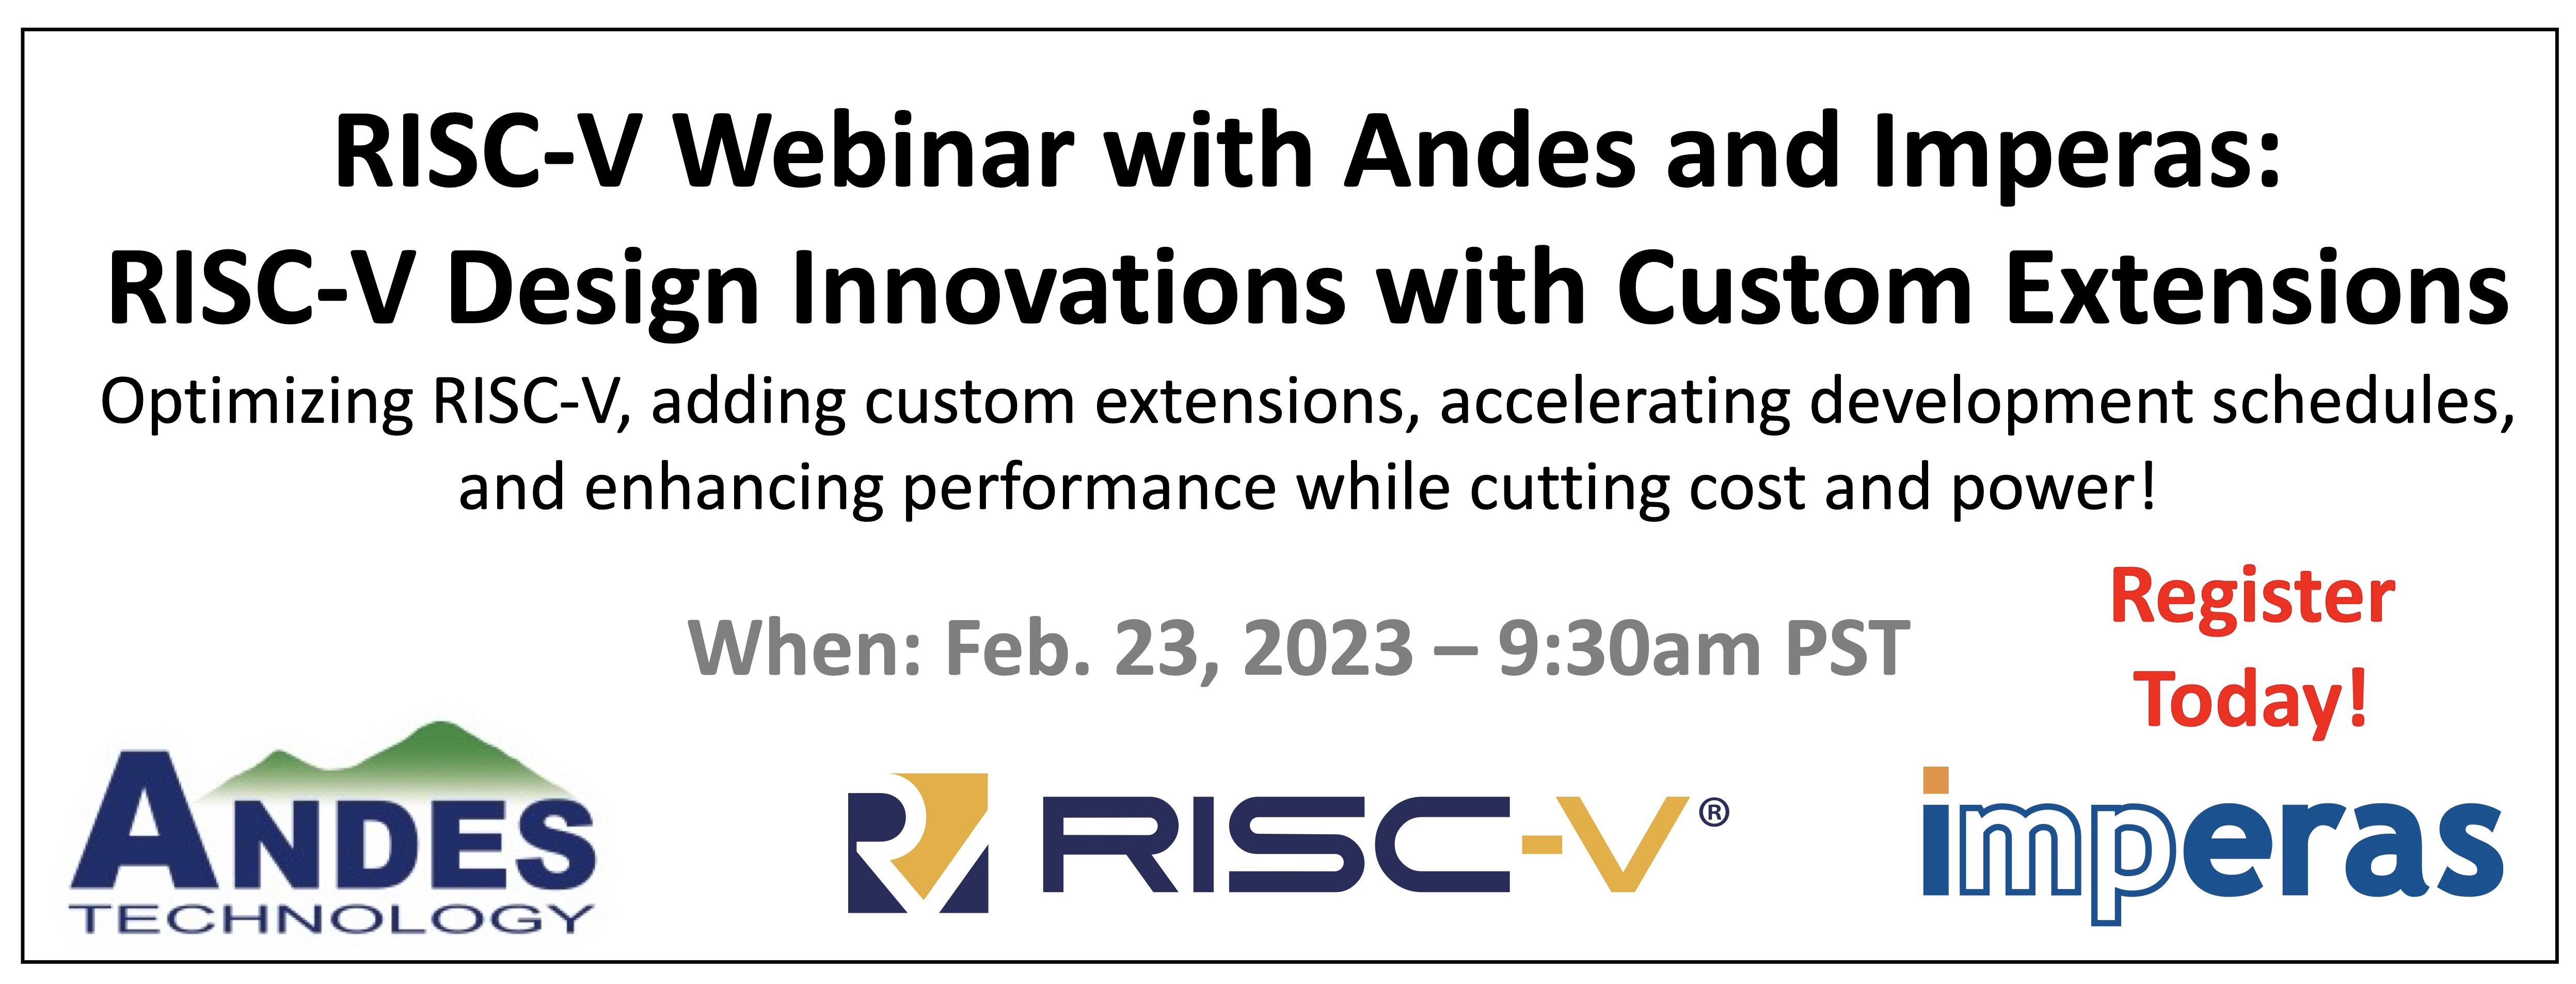 RISC-V Webinar with Andes and Imperas